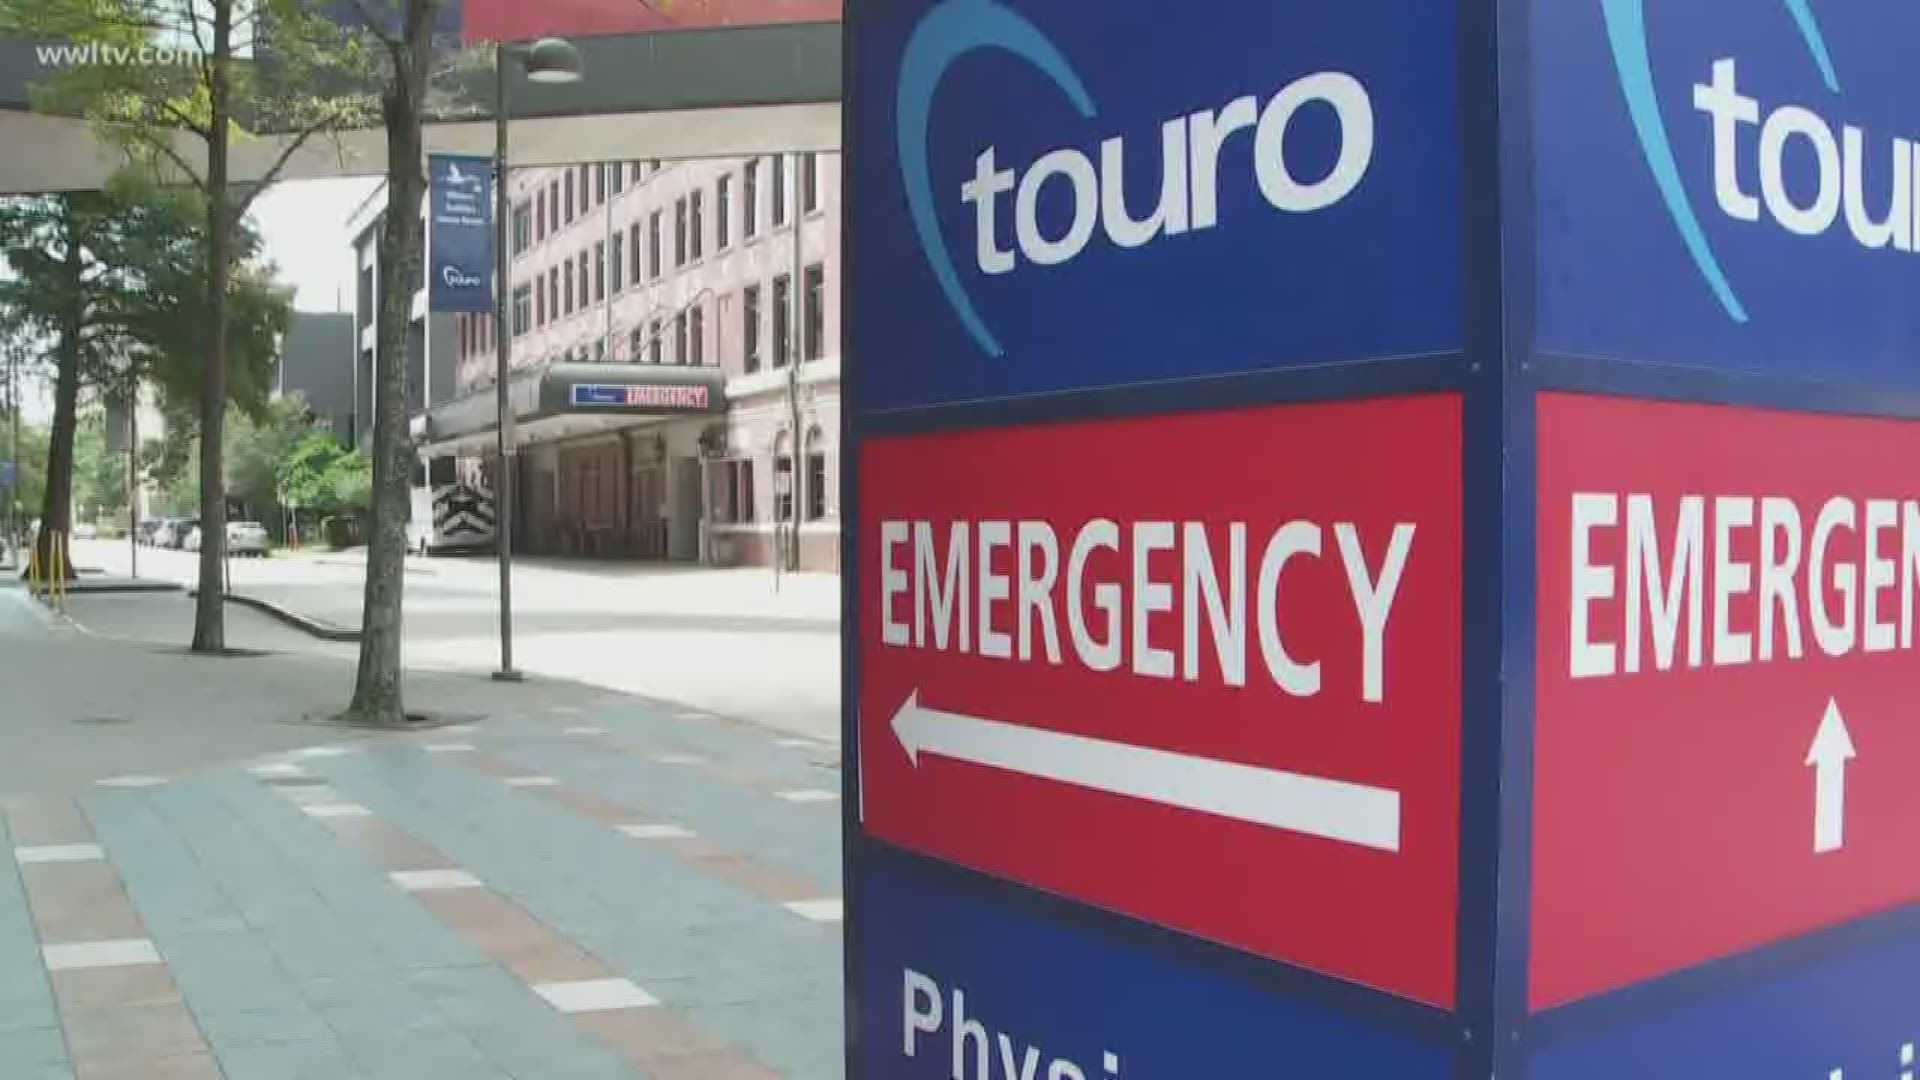 According to the hospital, no money was requested or exchanged. Touro also claims at no point was patient or employee information, including medical records, compromised.